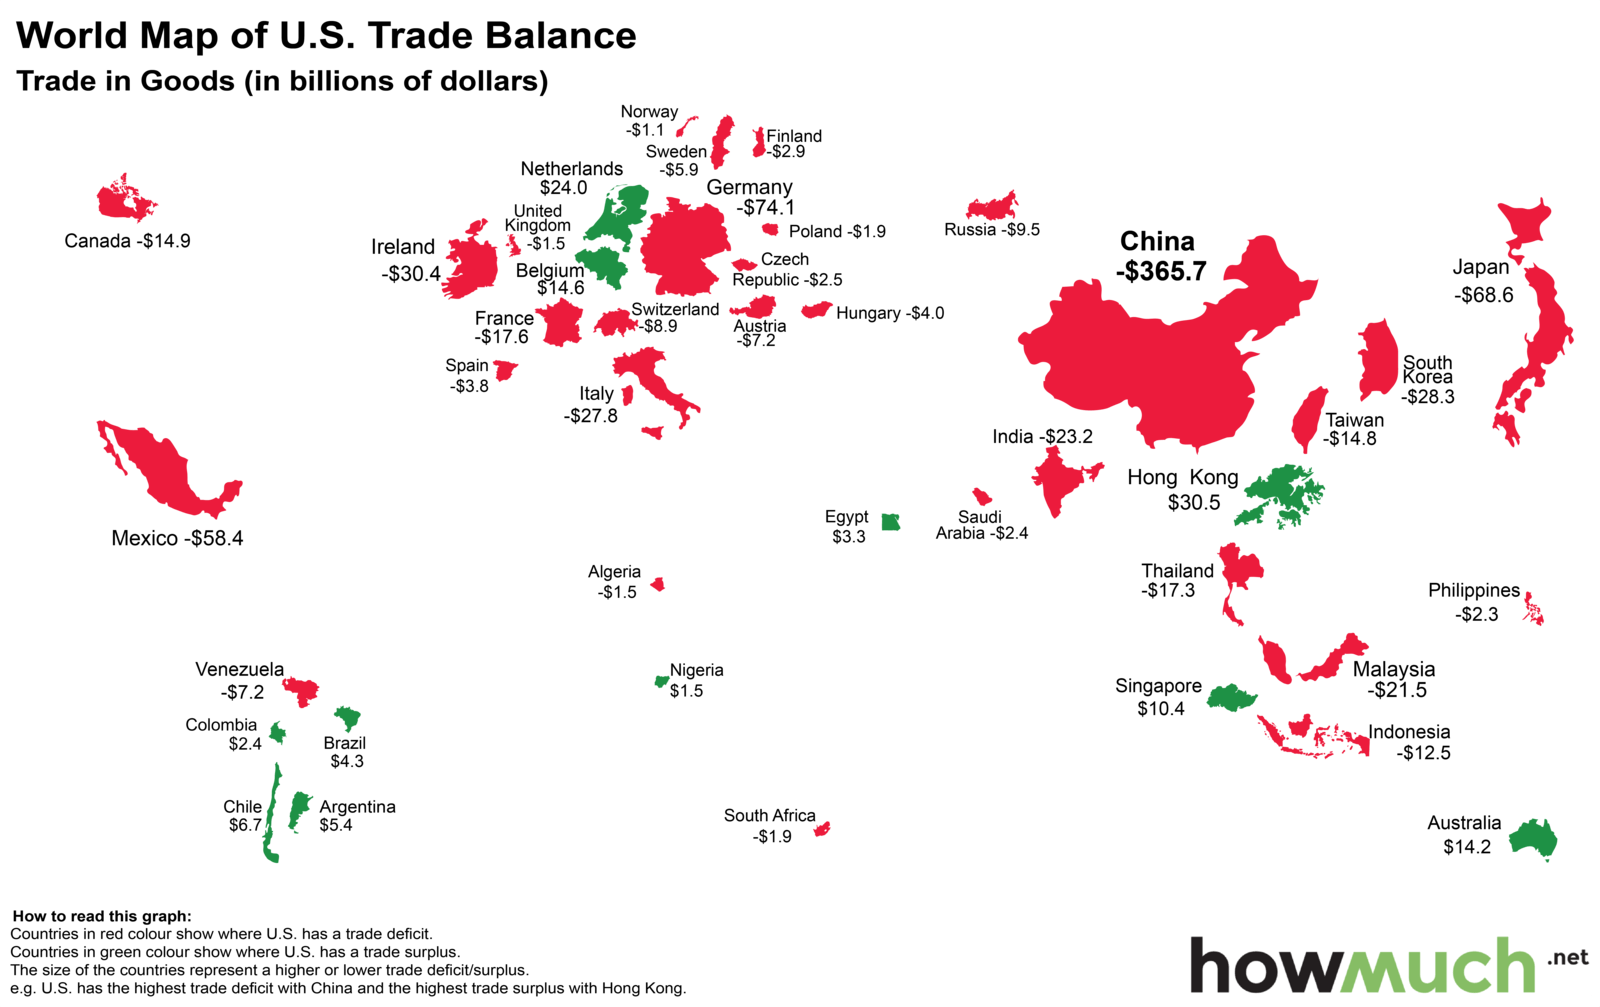 The World Map of the U.S. Trade Deficit